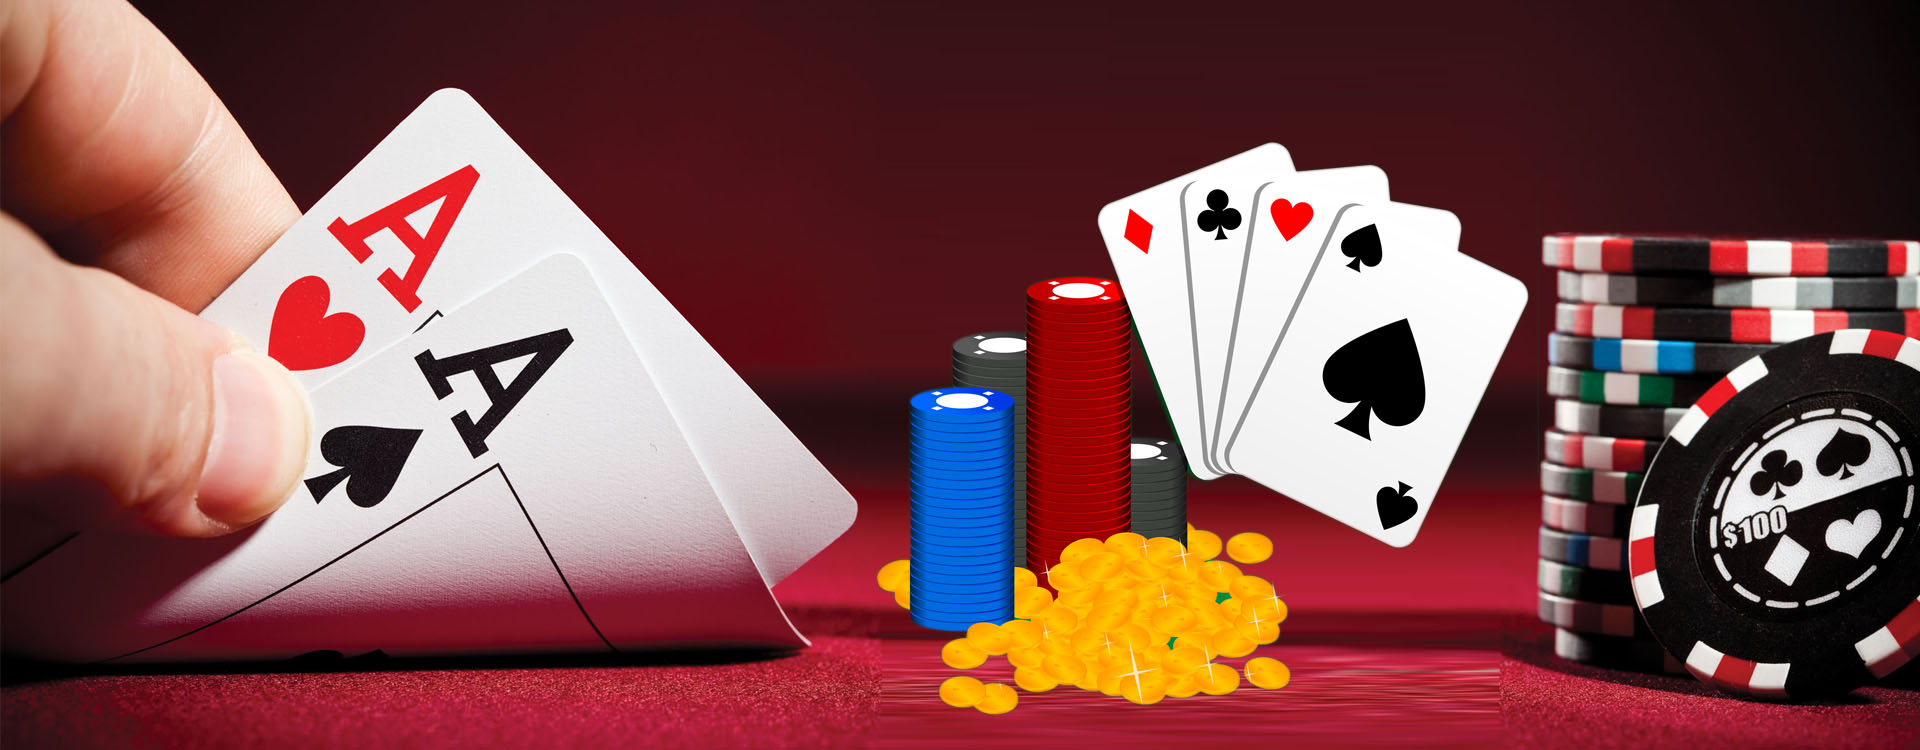 New Cheating Playing Cards software device Shop in Delhi India Buy Online KK Cards Delhi at Low Price Gambling Cards Devices & Gadgets, Poker Game, Secret Soft Contact Lenses for Invisible Marked Cards from Cheating Playing Cards Shop, Delhi India